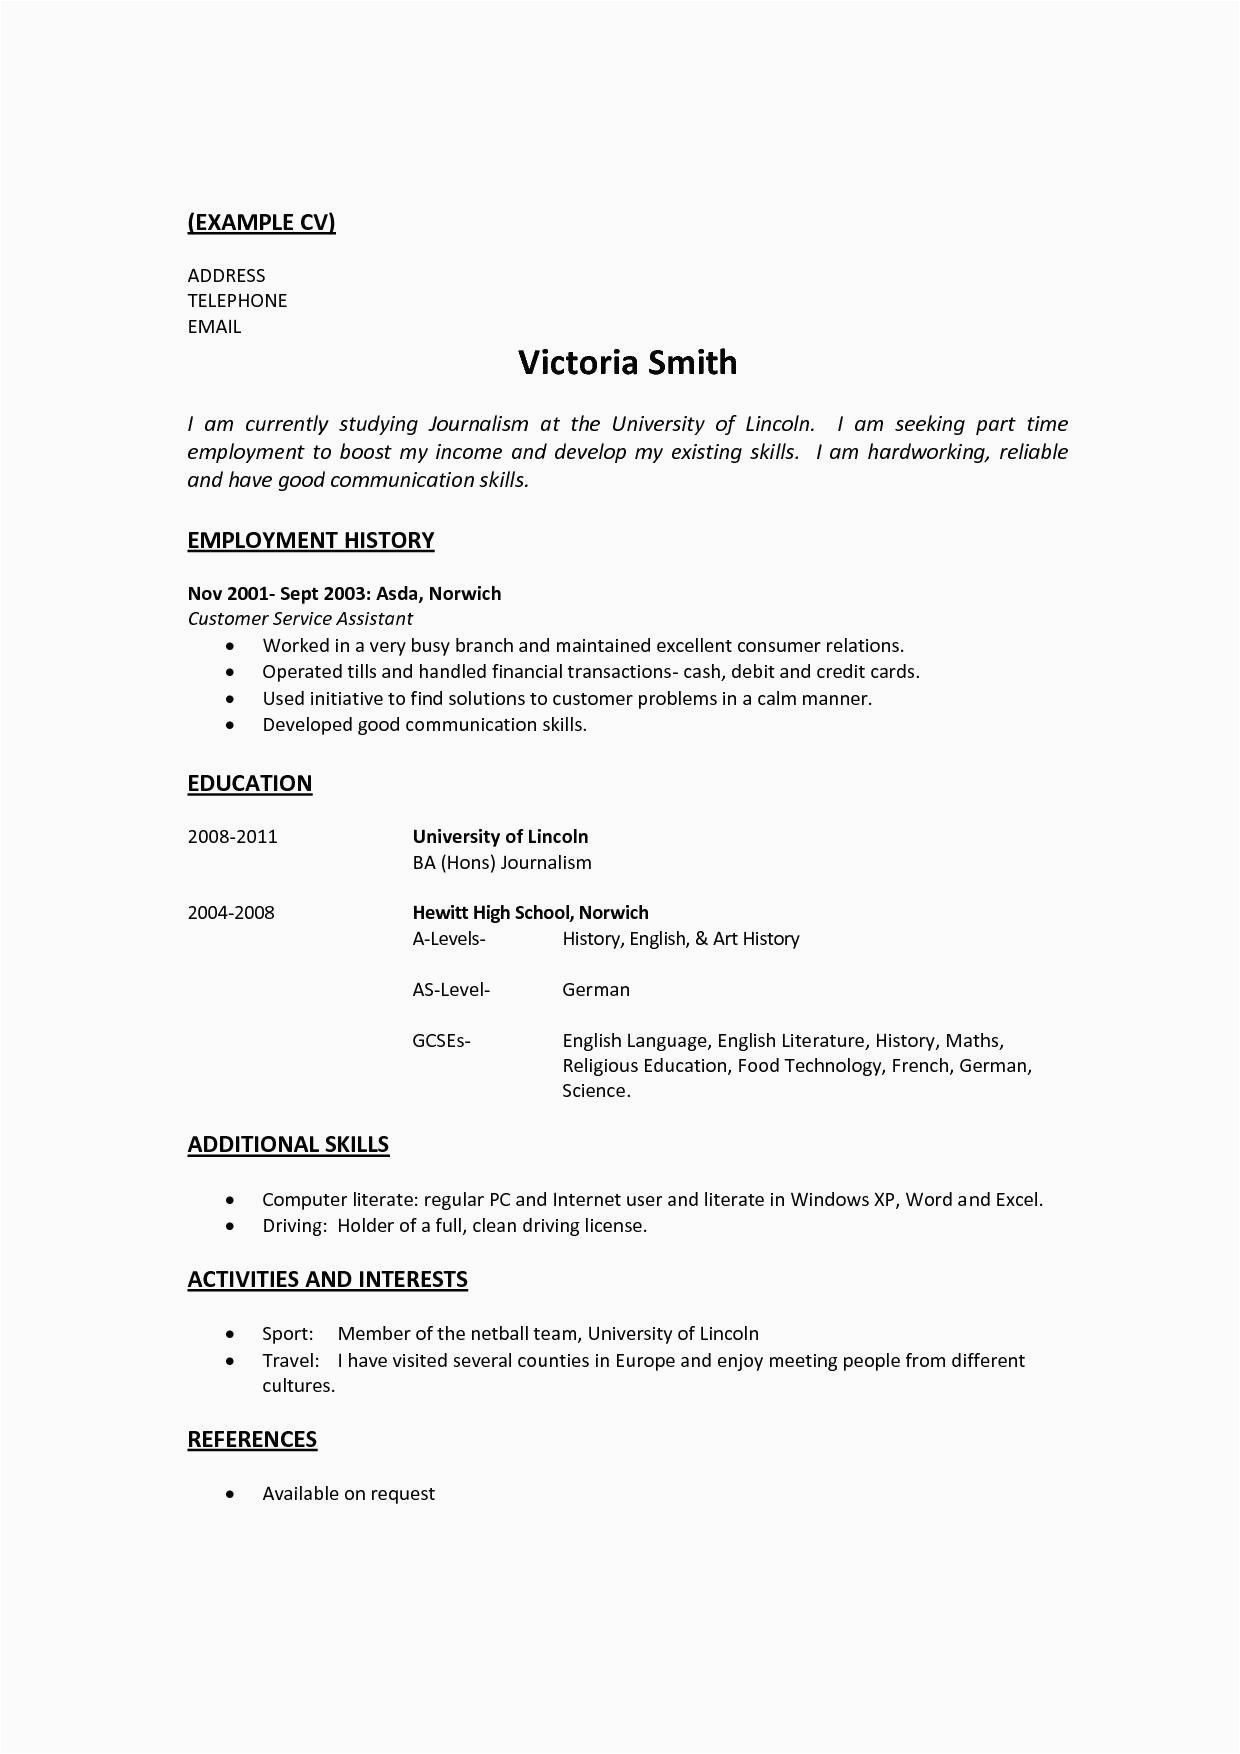 Sample Resume for Job Application with No Experience Resume Templates for Students with No Work Experience